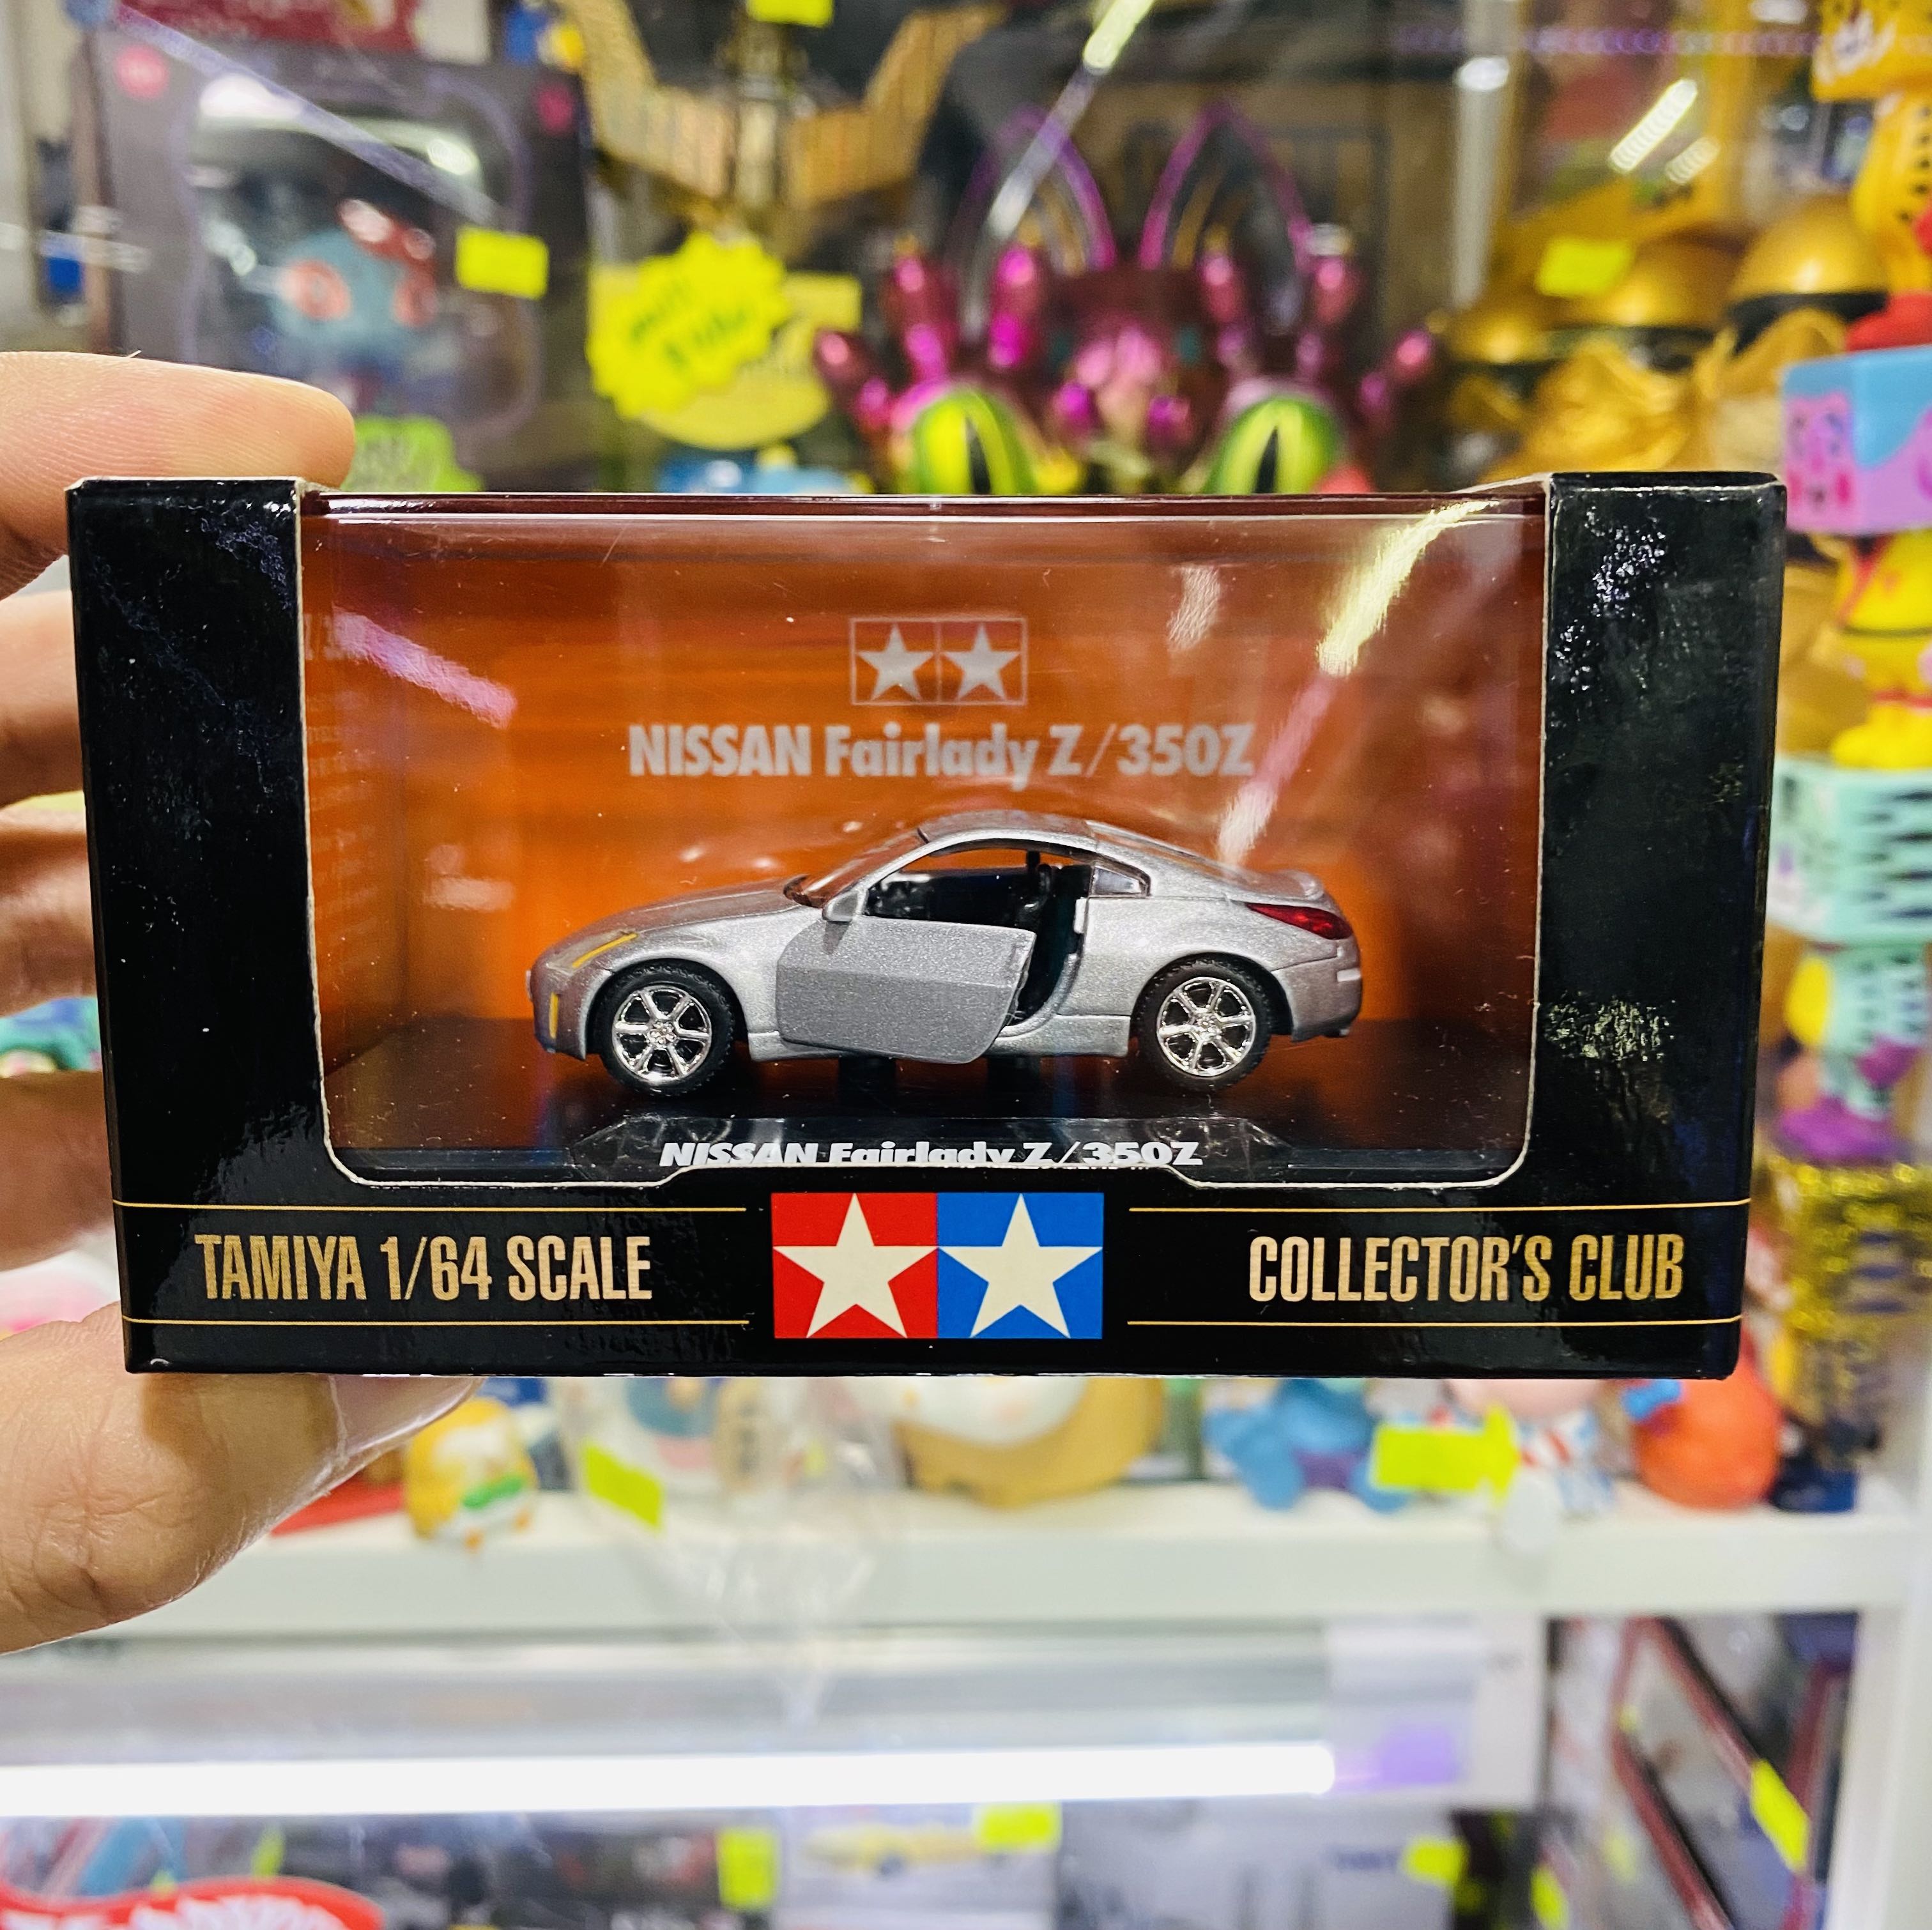 sold out) Tamiya 1/64 Scale Collector's Club Nissan Fairlady Z